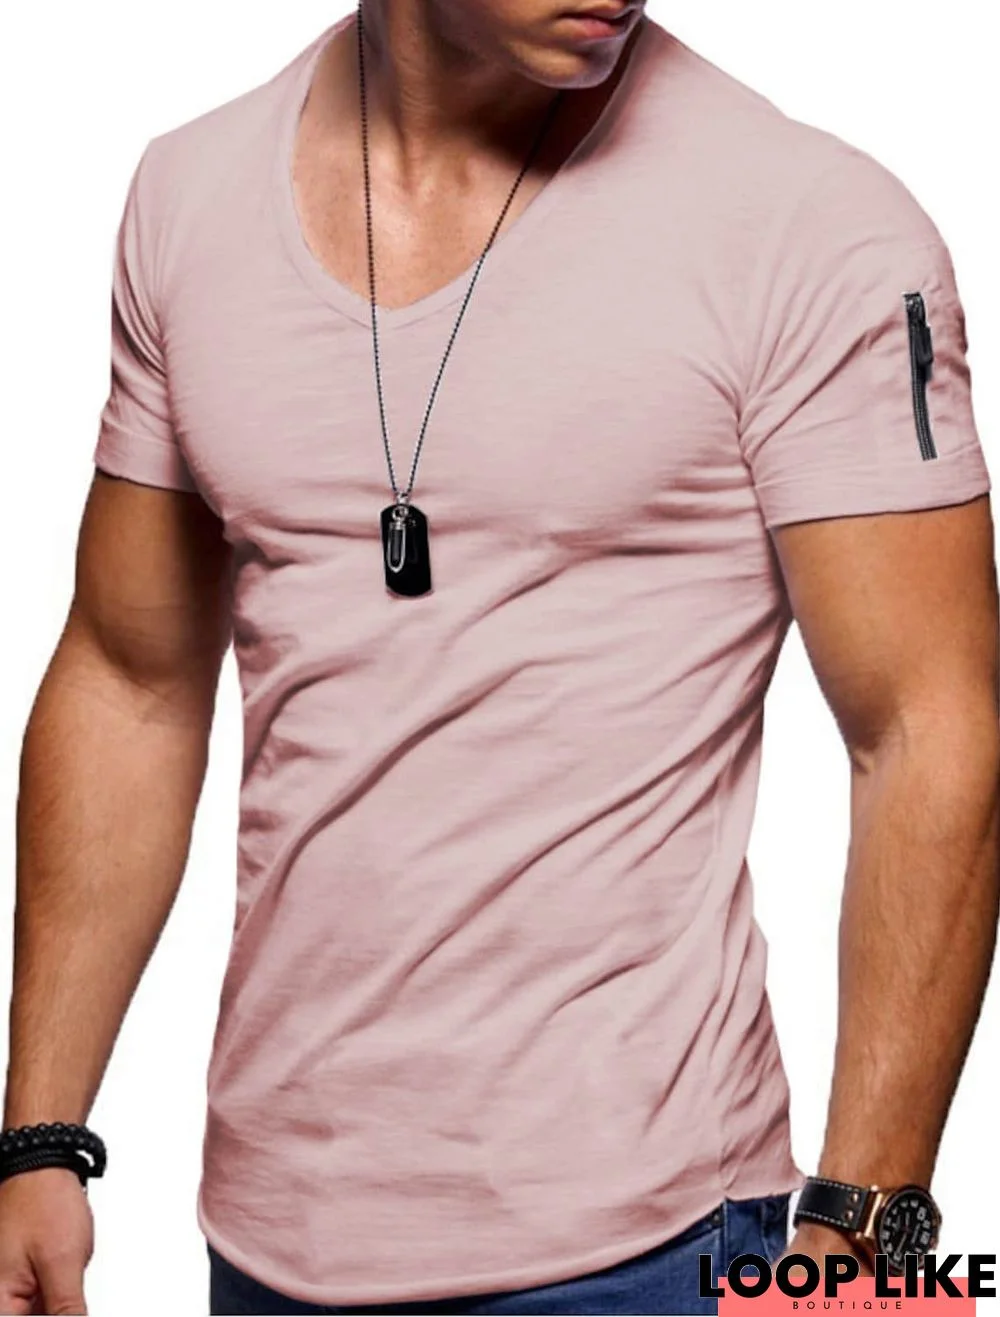 Mens V Neck T Shirt Tee - Solid Color Short Shirts For Men Short Sleeve Slim Fitness Workout Athletic Business Casual Basic Big Tall Shirts Black Gray Army Green